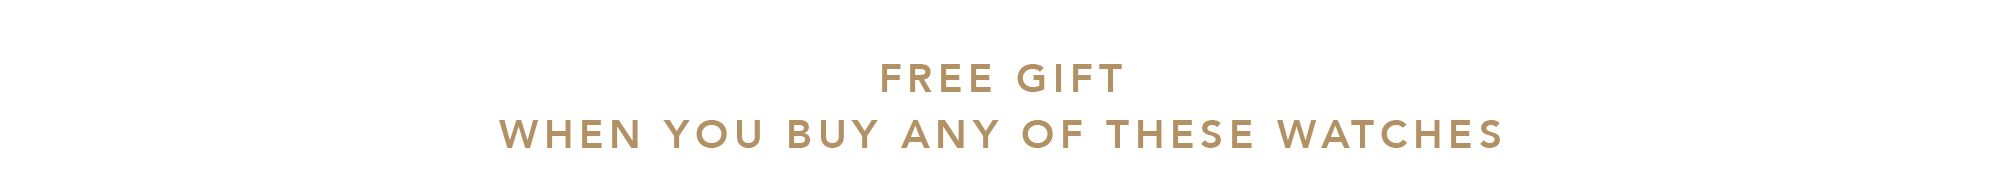 FREE GIFT WHEN YOU BUY ANY OF THESE WATCHES